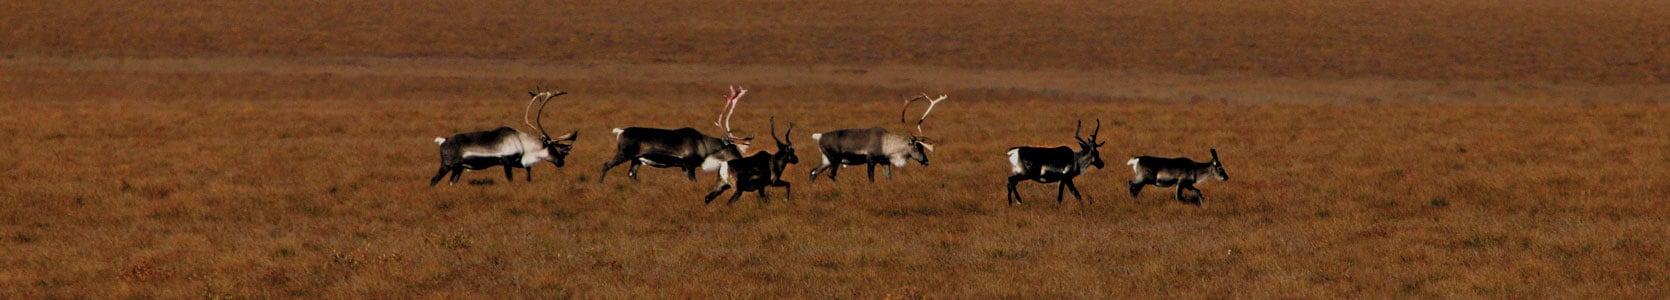 Herd of caribou on the tundra.